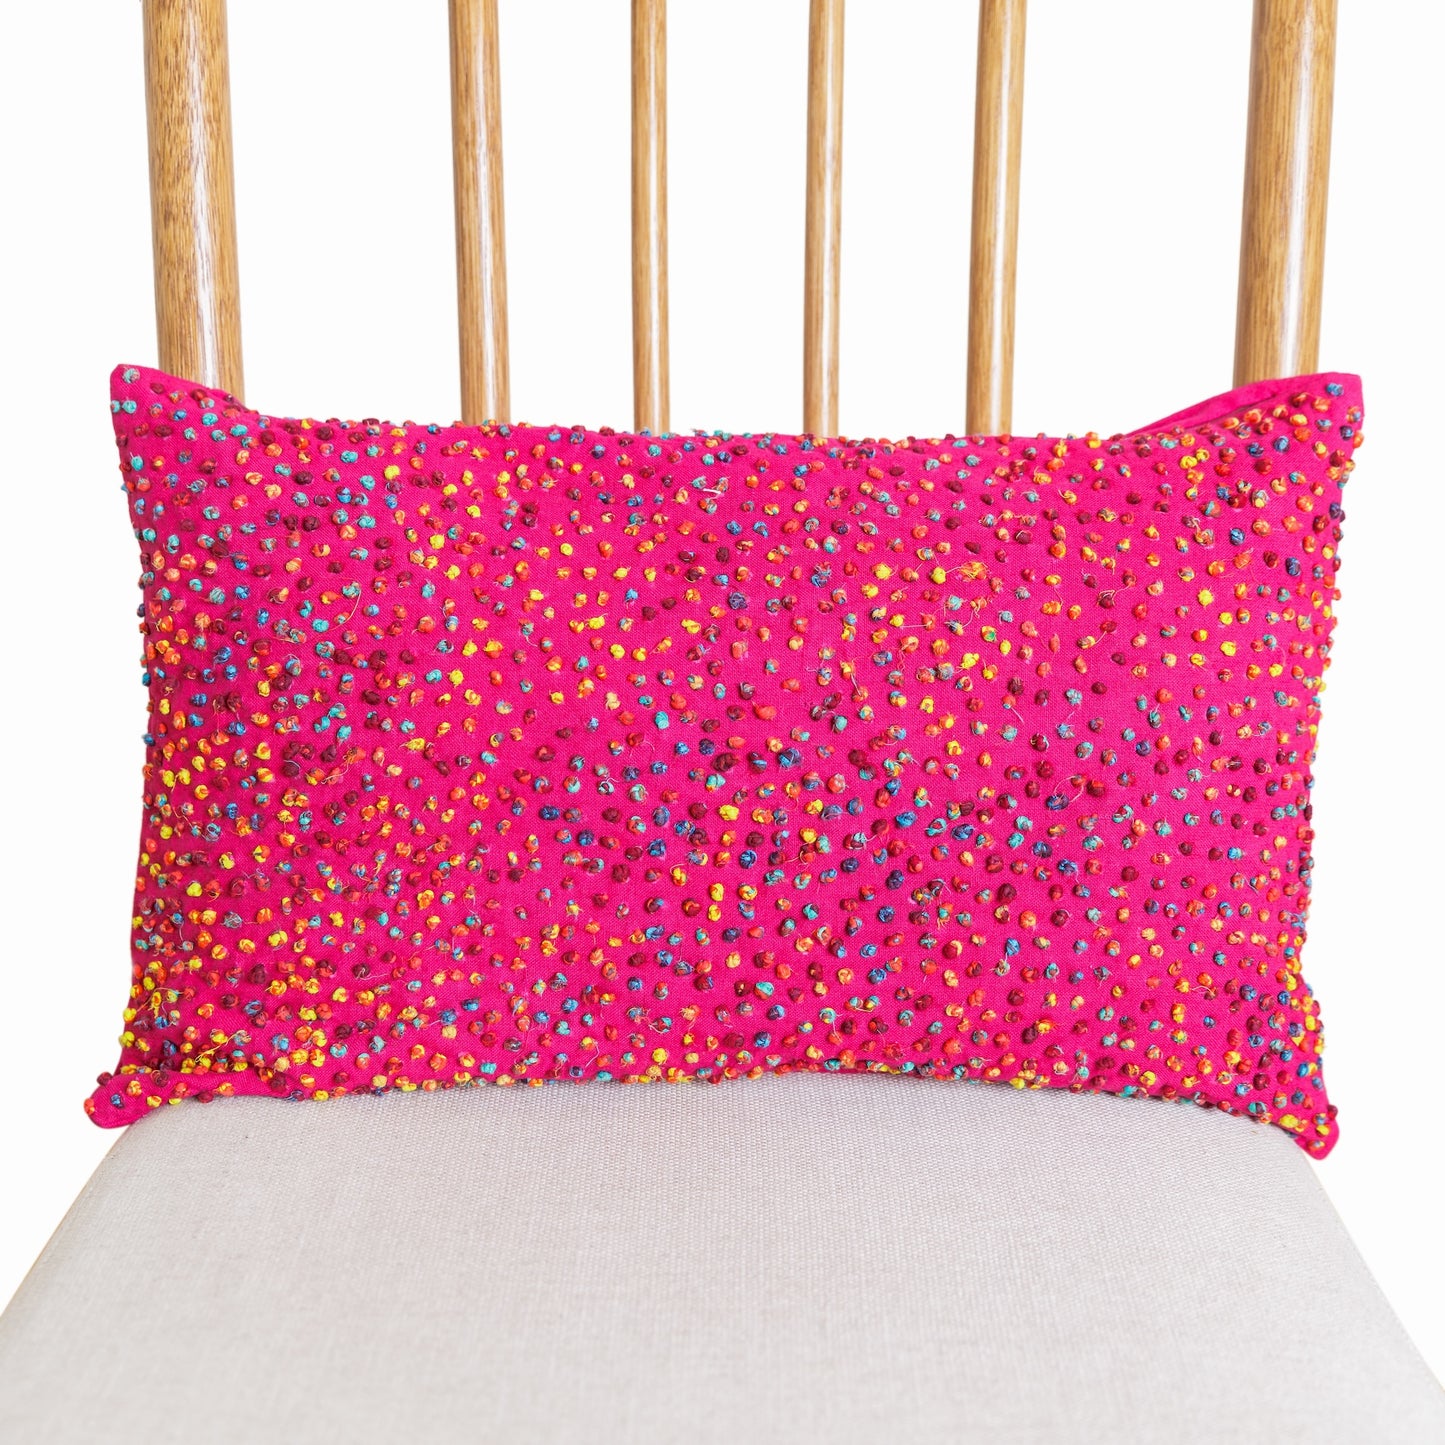 23tr20 - Hand embroidered french knot cotton pillow